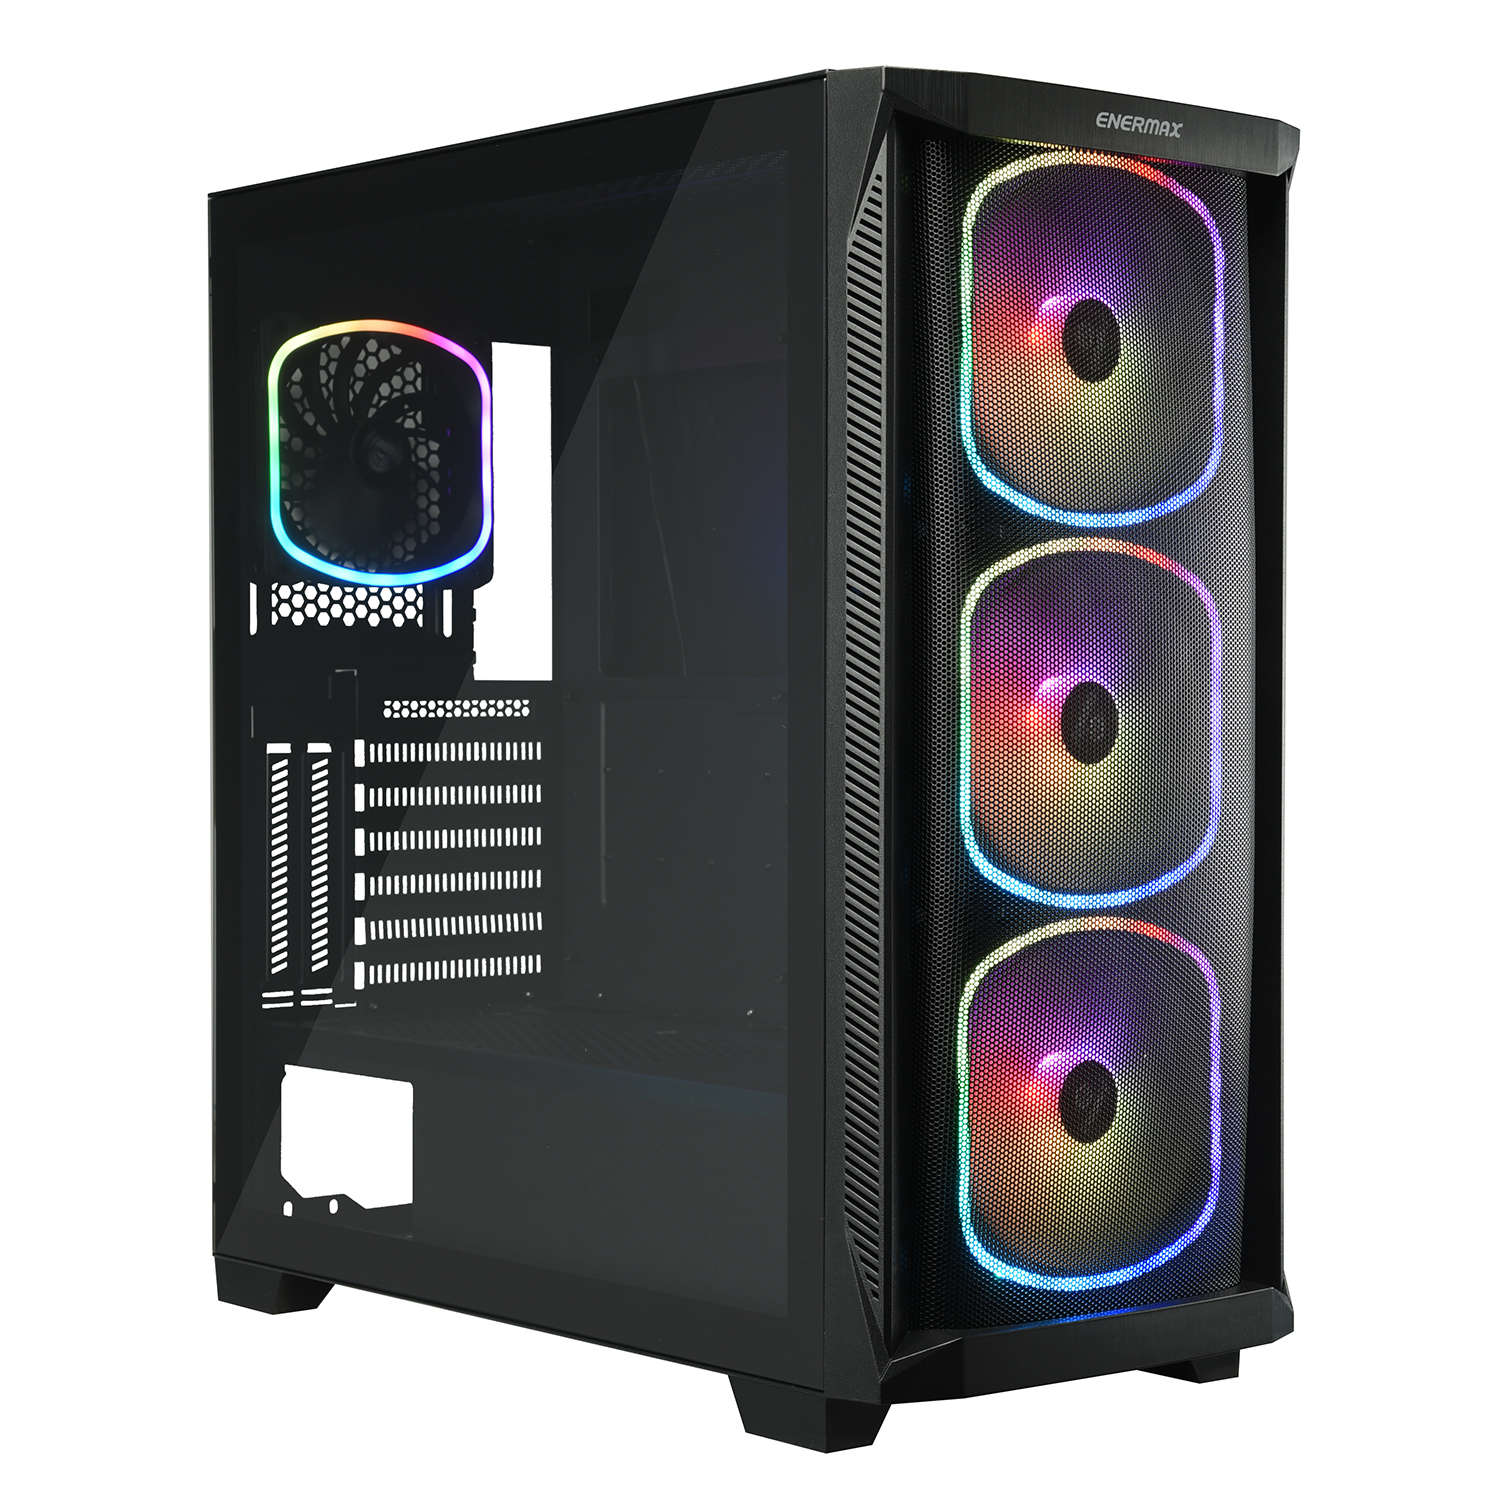 StarryKnight SK30 Mid-Tower PC Case - Products - ENERMAX